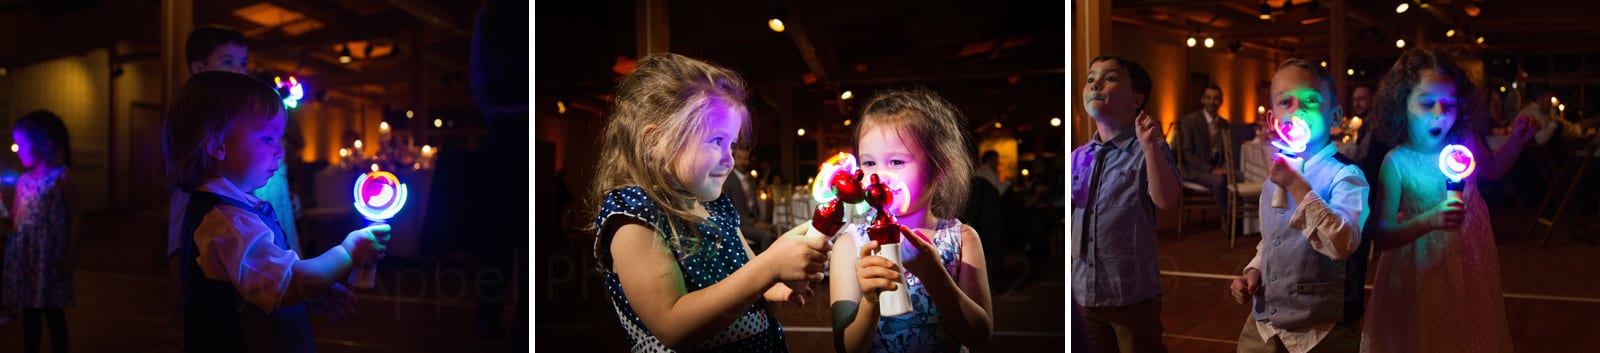 Small children are fascinated by brightly lighted whirligigs during a wedding reception. 